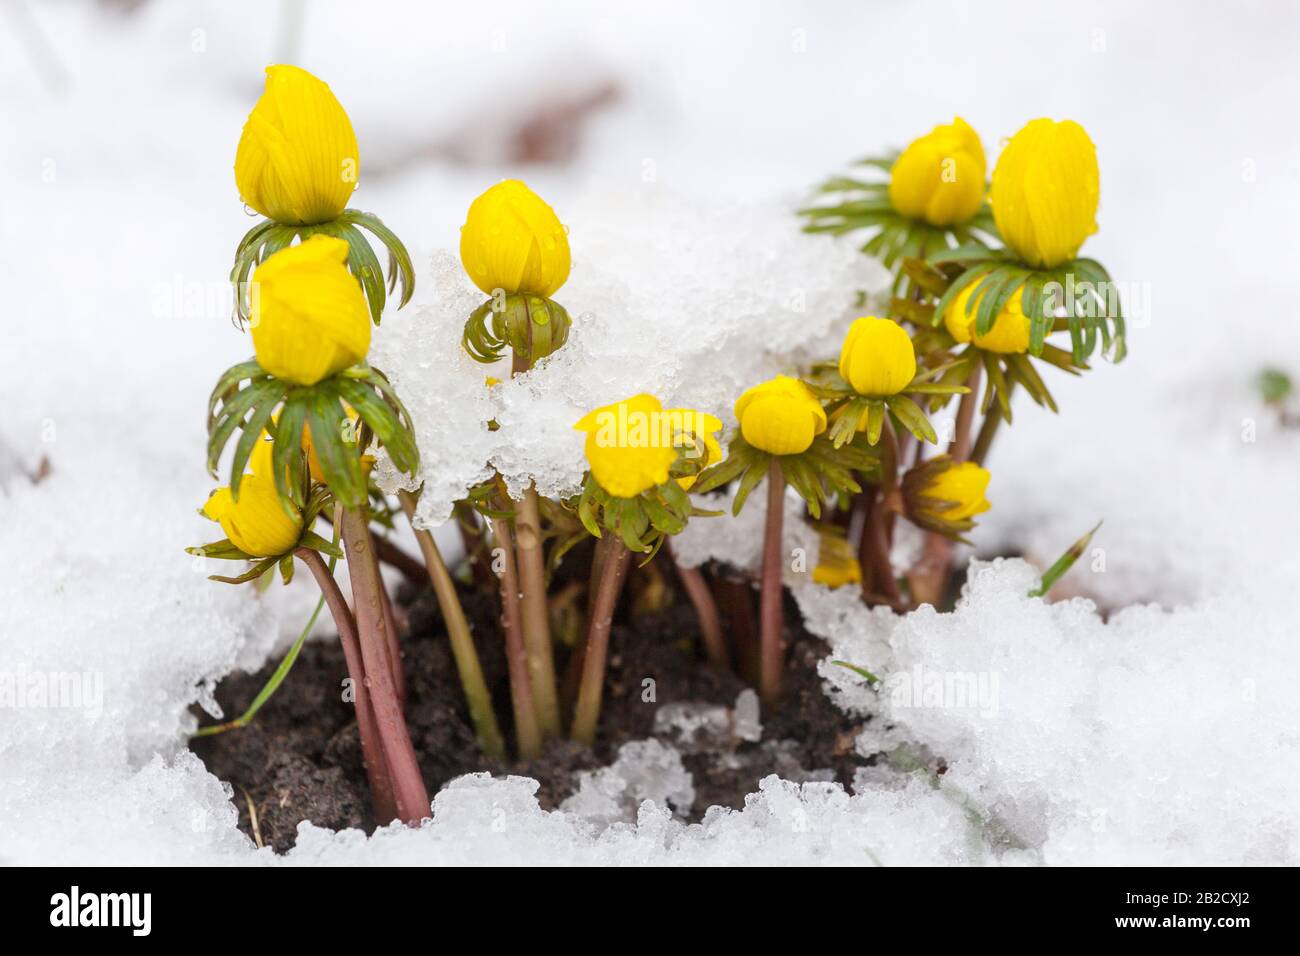 Winter Aconite Eranthis hyemalis close up flowers covered snow february flowers in snow Stock Photo